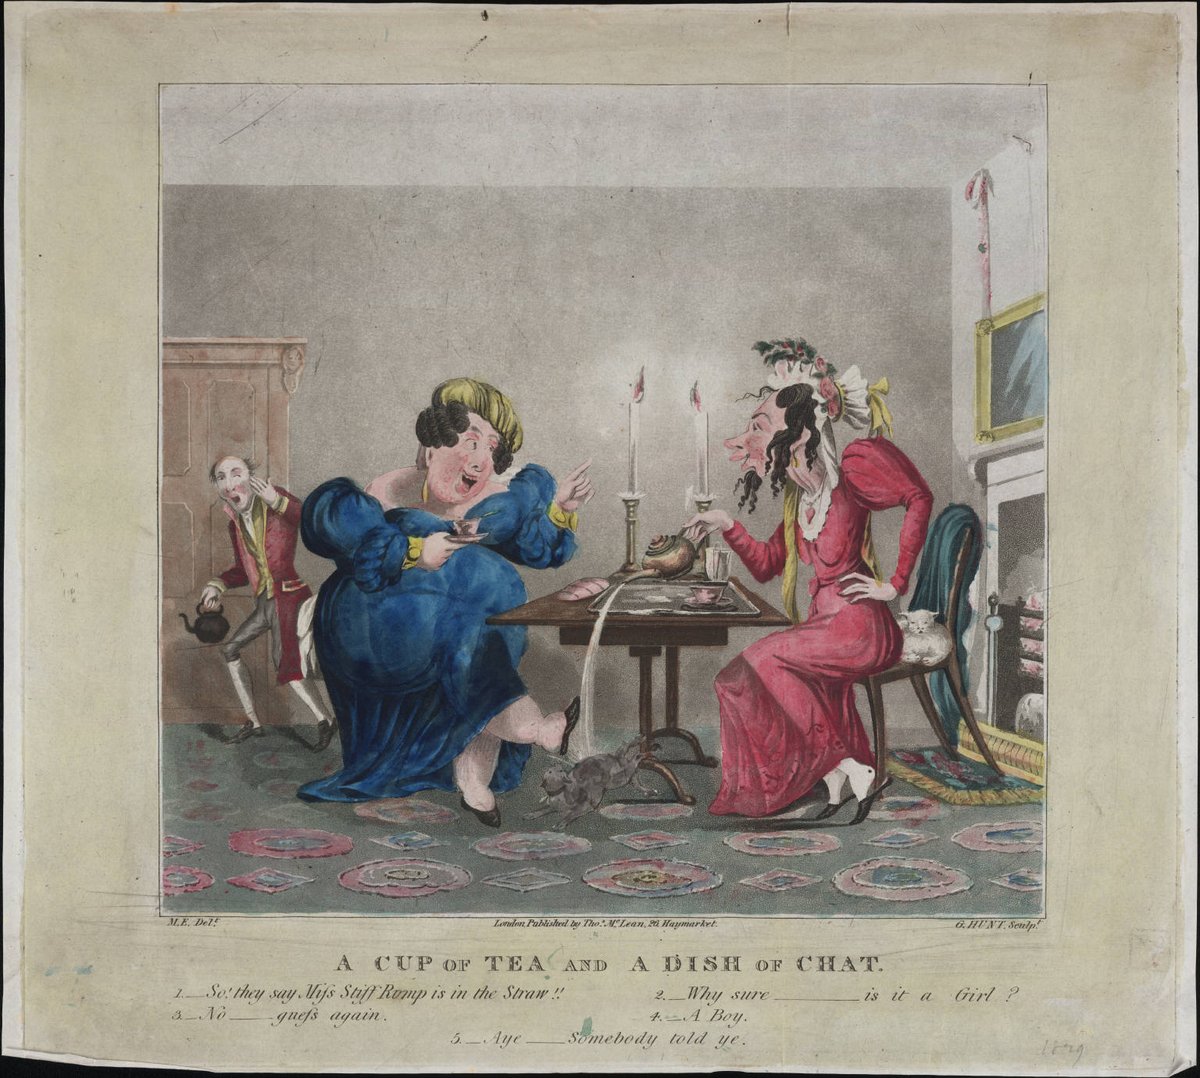 A cup of tea and a dish of chat. #NationalTeaDay #twitterstorians